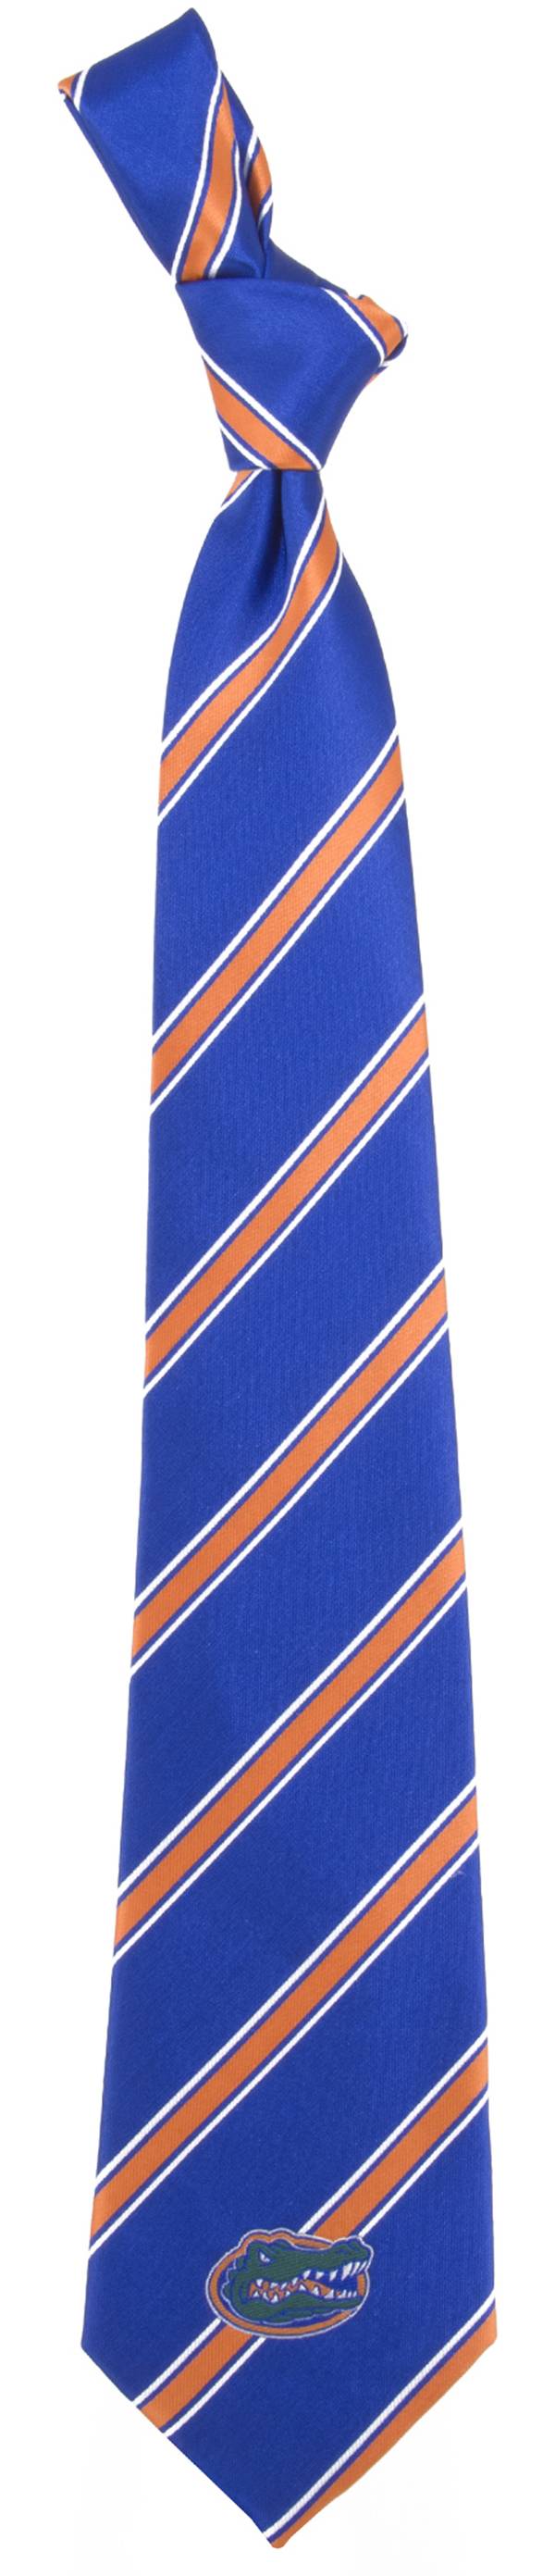 Eagles Wings Florida Gators Woven Poly 1 Necktie product image